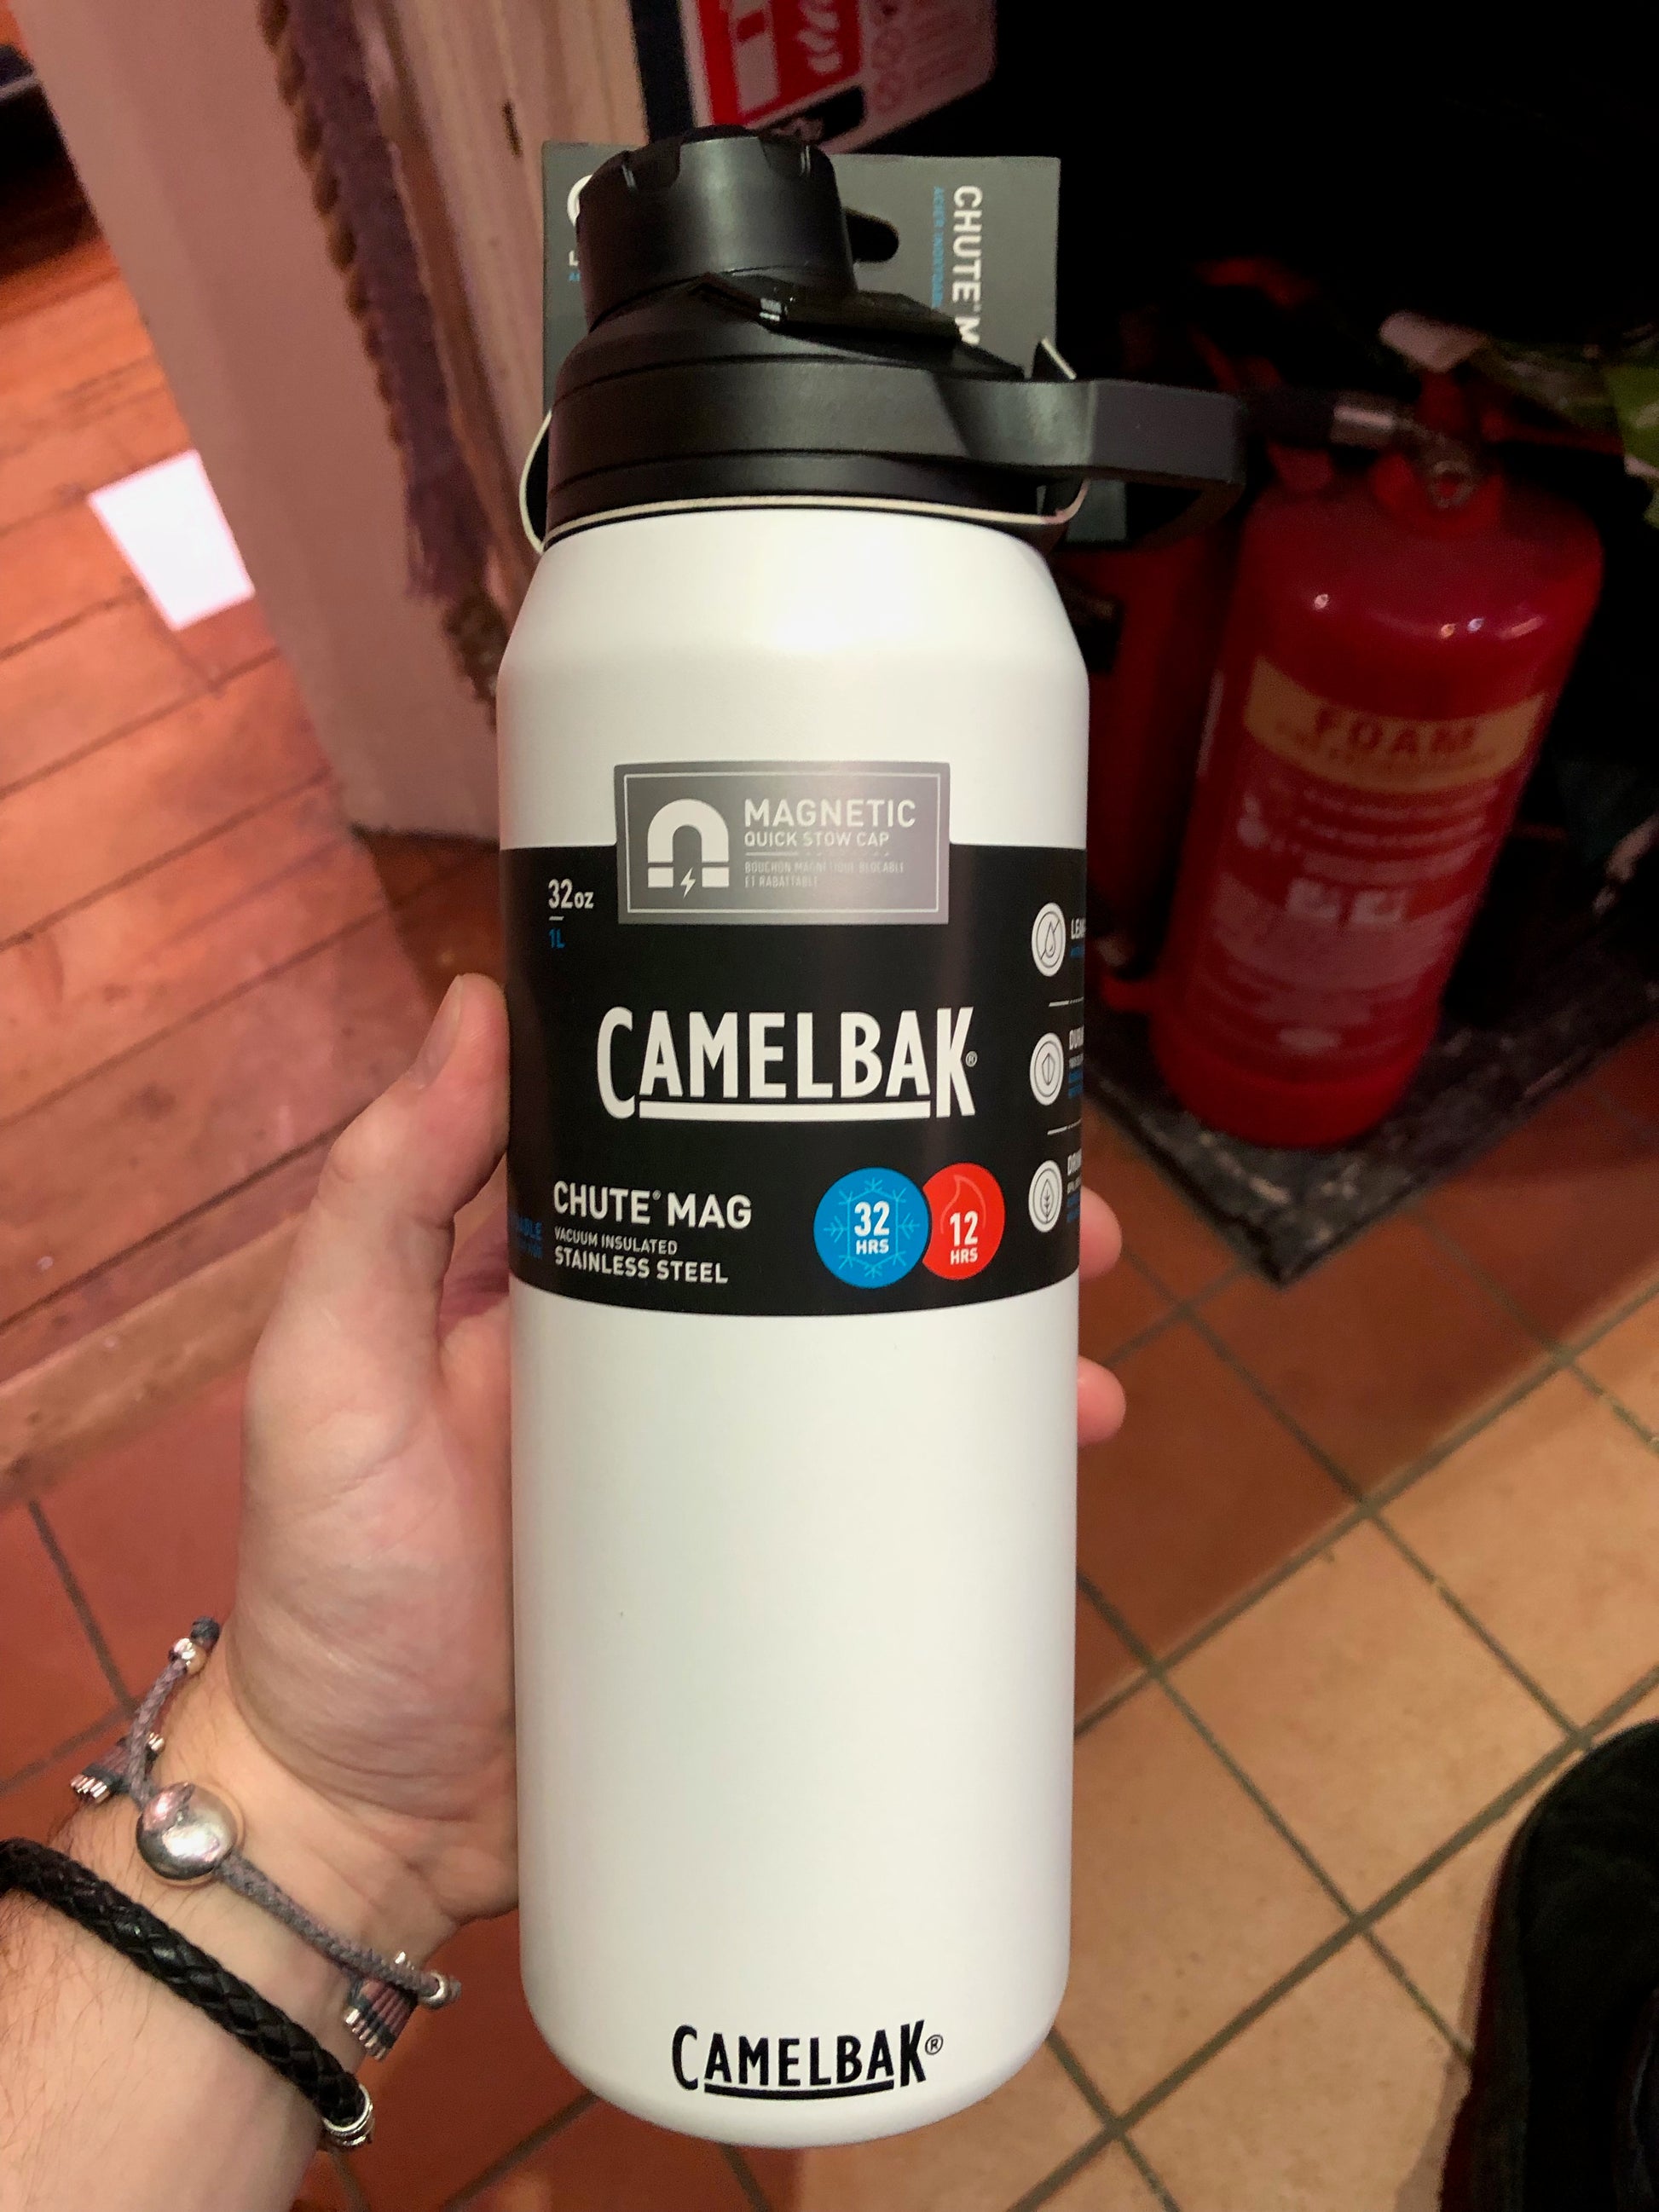 Stainless steel vacuum insulated thermos/bottle by technological wizards Camelbak, featuring leak-proof design, magnetic cap and easy carry handle.